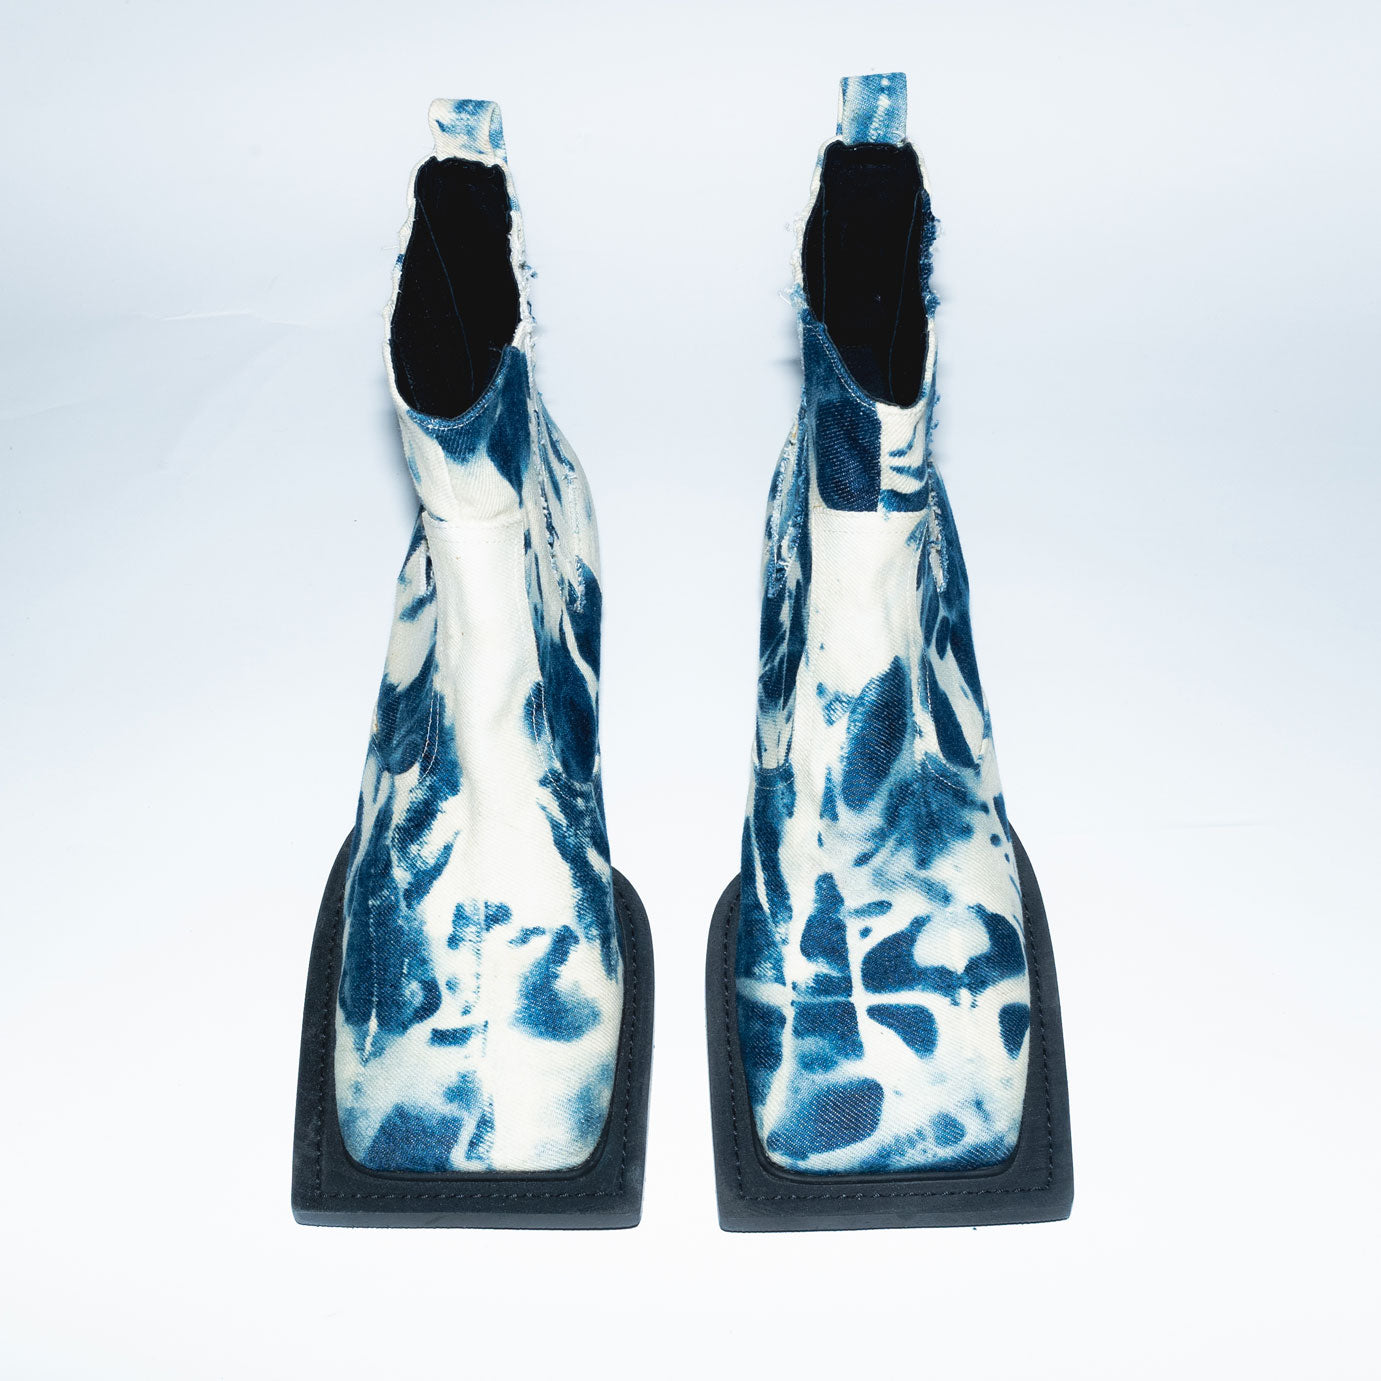 Archive Howler Ankle Boots in Tie Dye Blue Denim